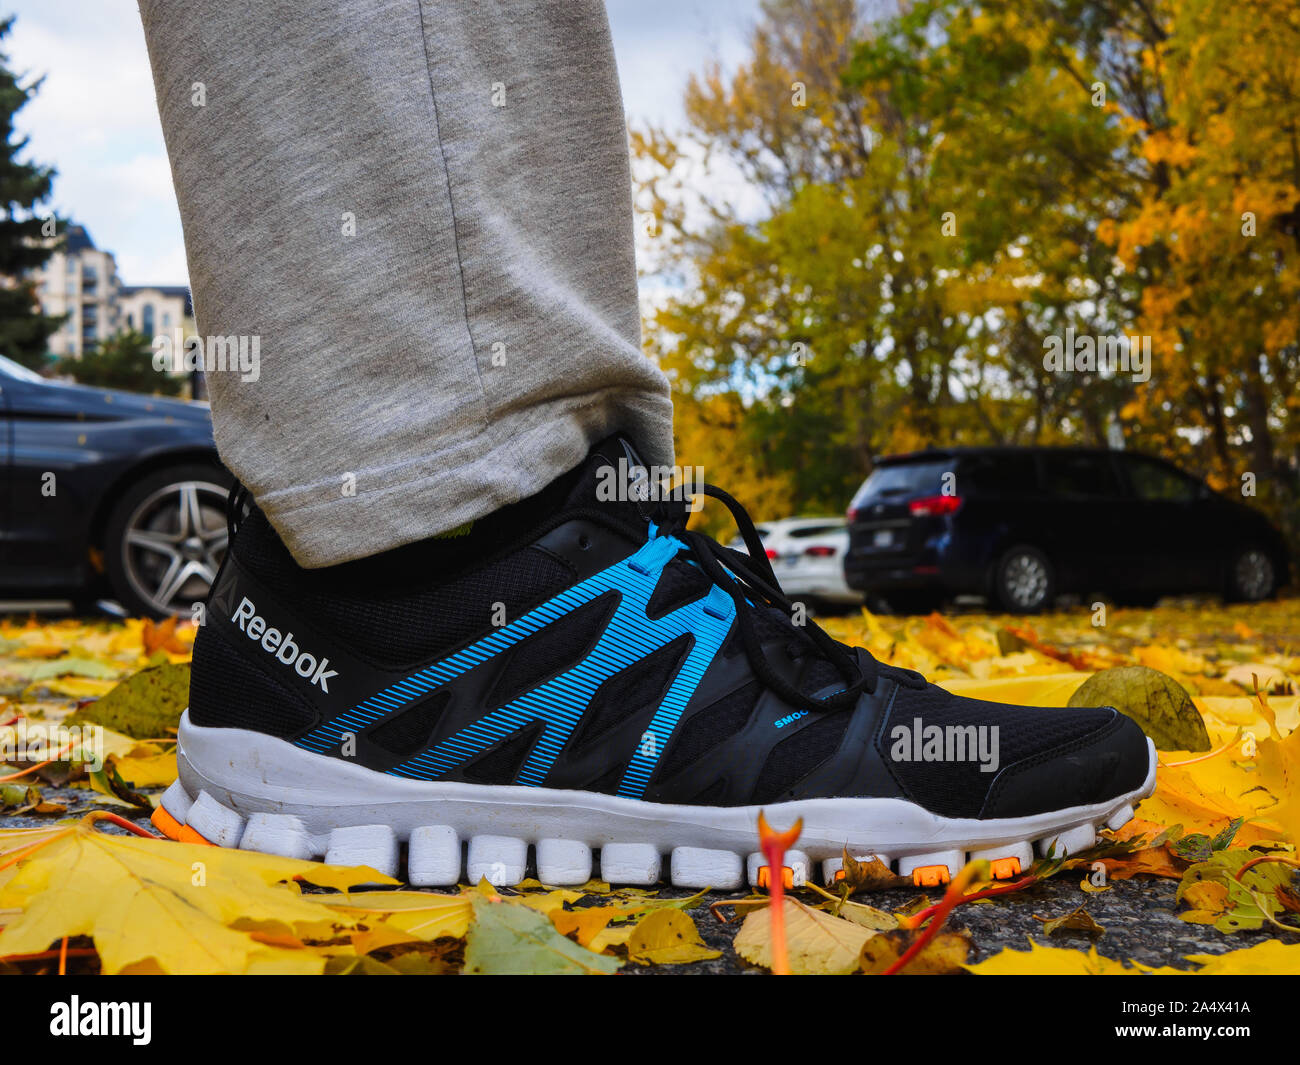 Reebok RealFlex 4 running shoes stepping around yellow leaves on the ground in autumn Stock Photo Alamy